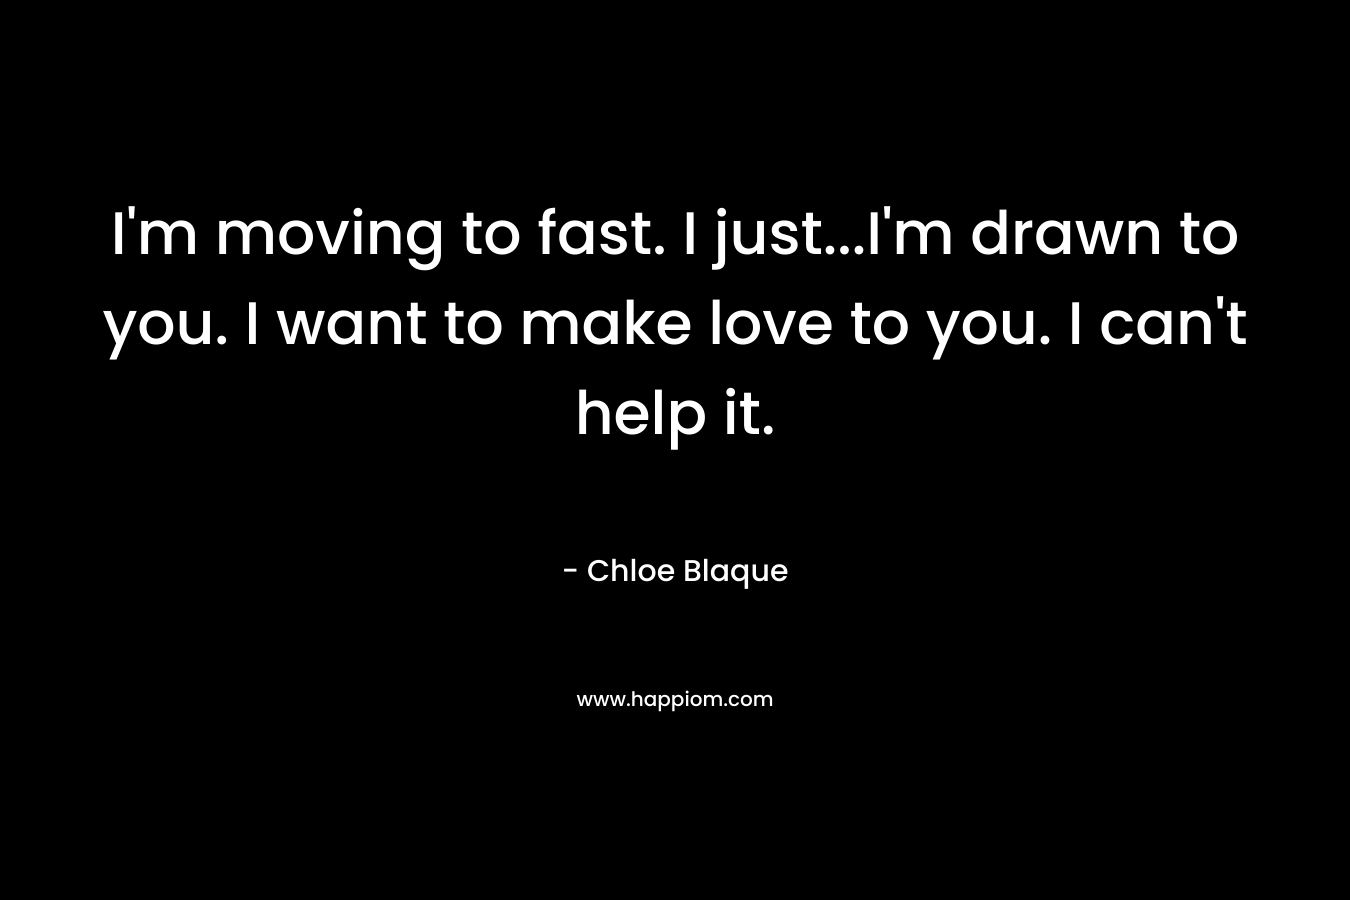 I’m moving to fast. I just…I’m drawn to you. I want to make love to you. I can’t help it. – Chloe Blaque